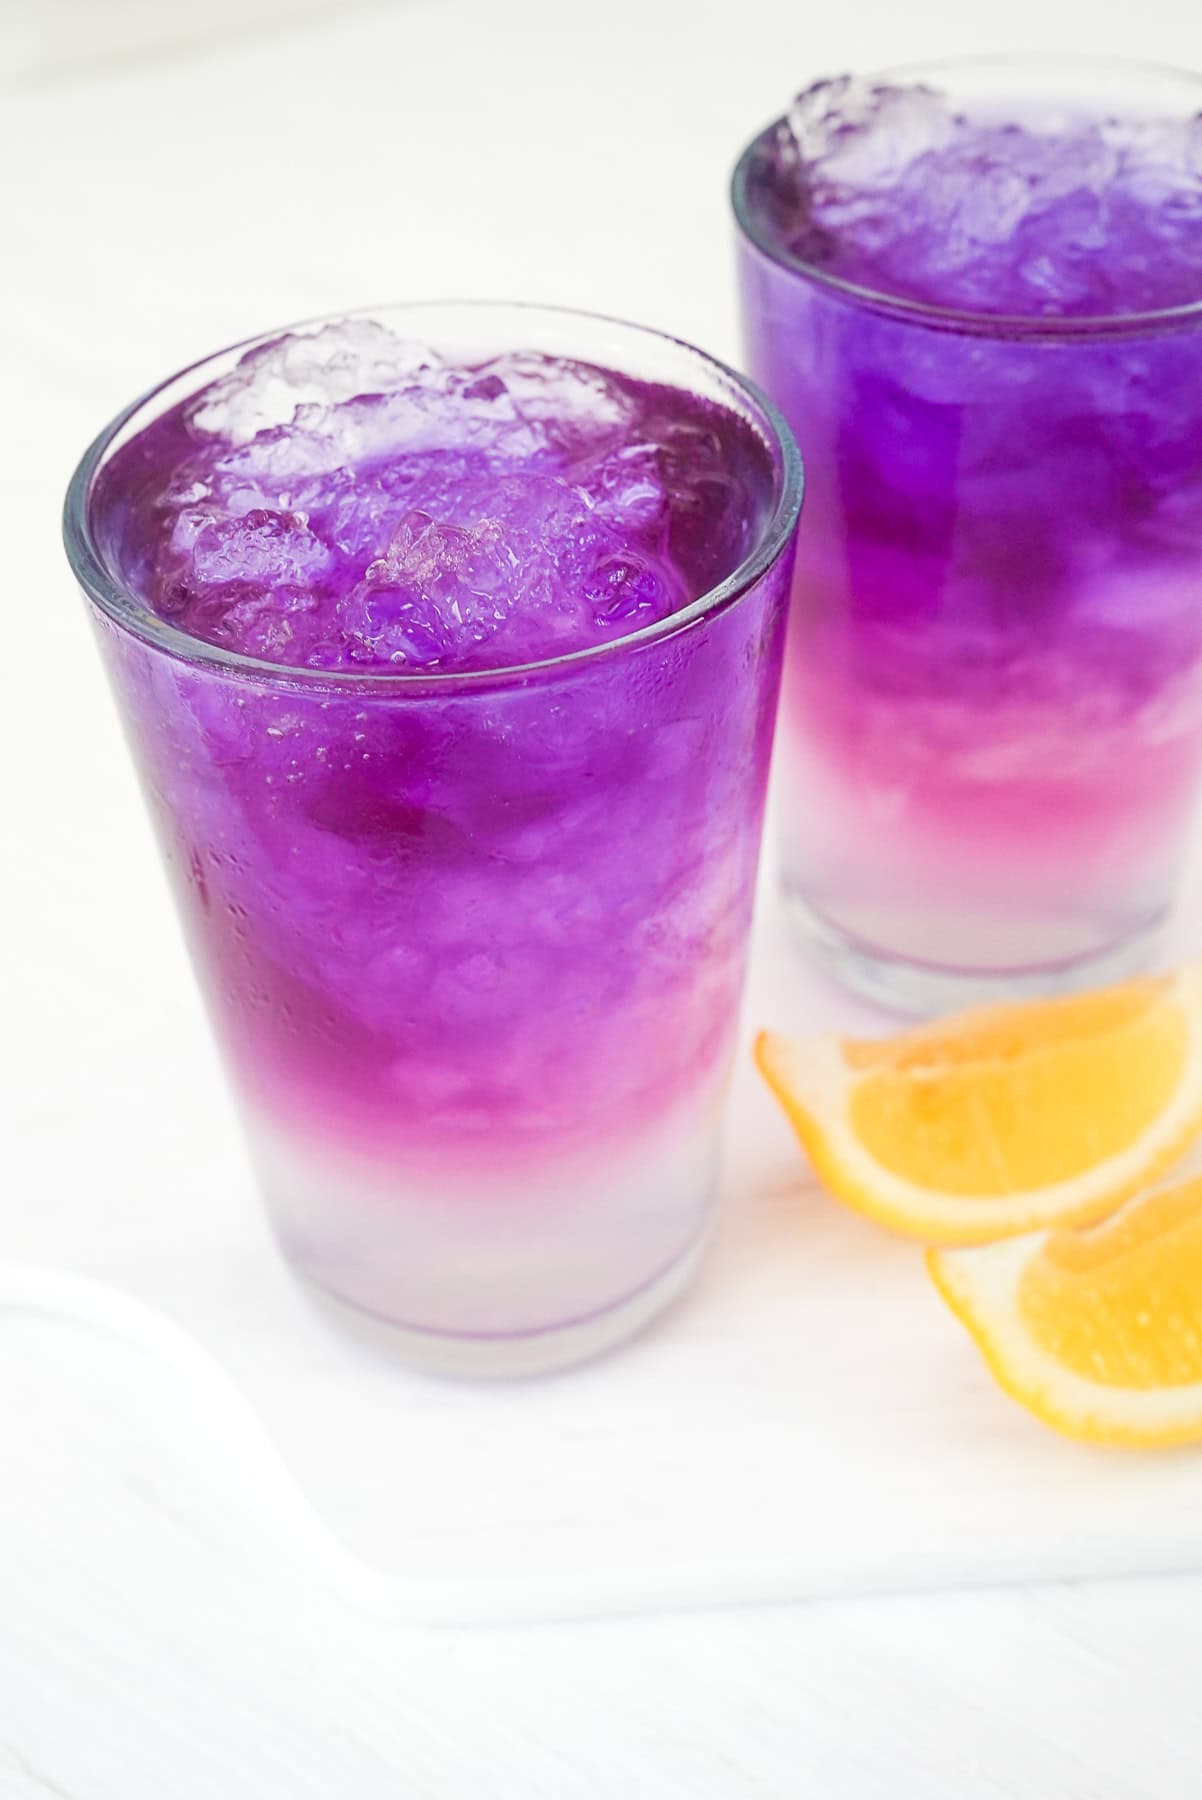 Butterfly Pea Lemonade with Layered Effect